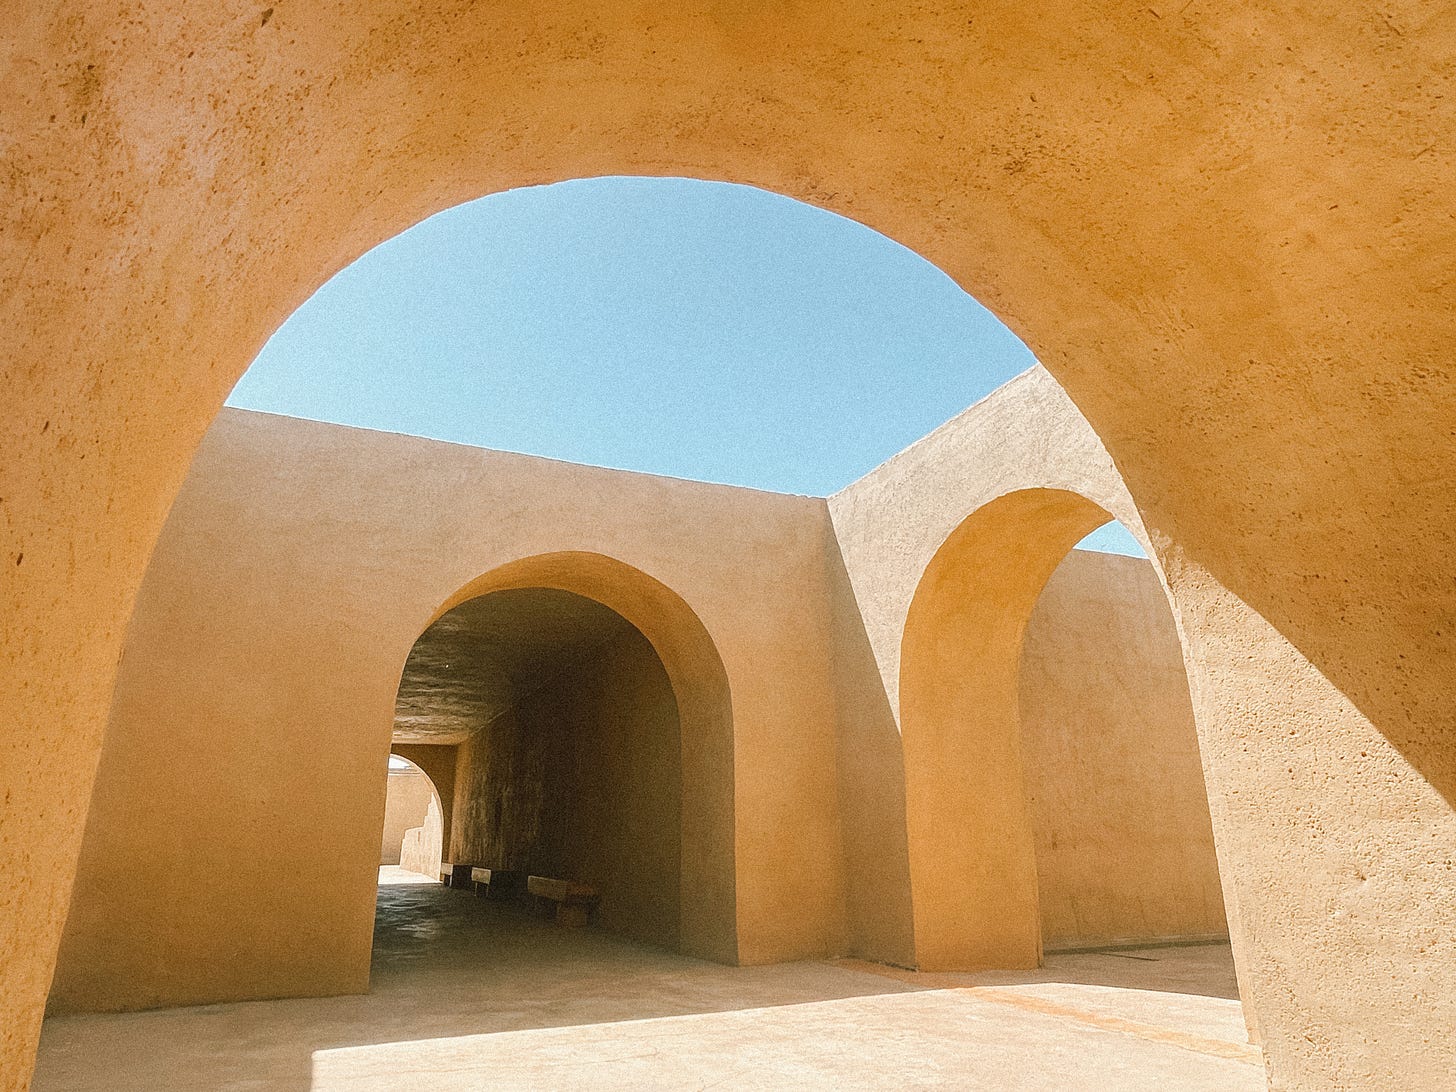 Packed sand and dirt are shaped into archways, creating the earthen walls of a house. A blue sky sits above